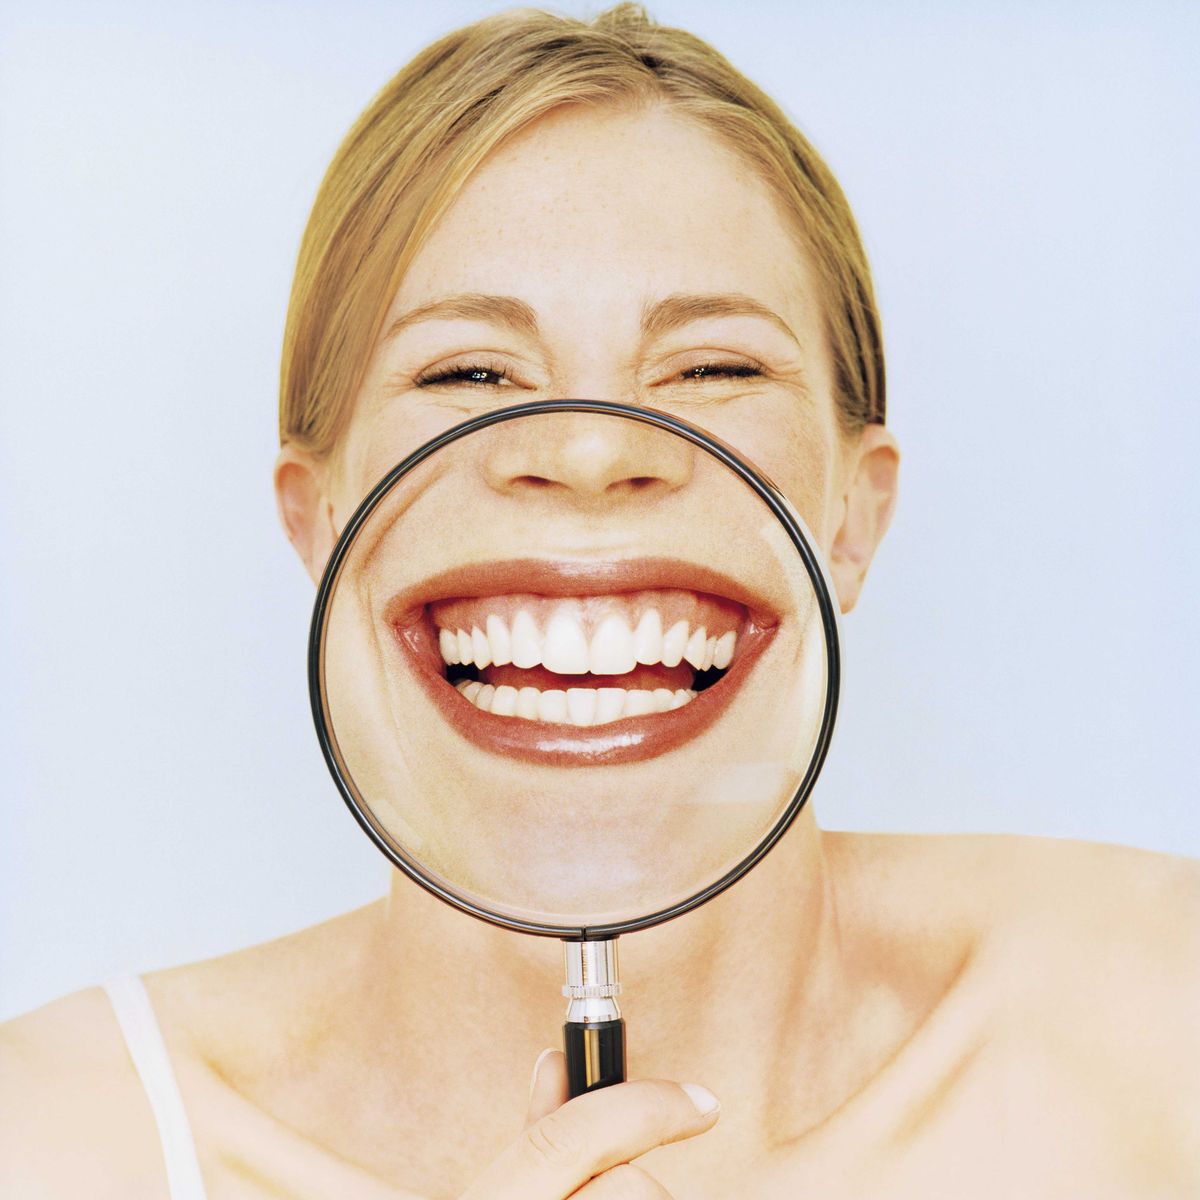 woman holding magnifying glass in front of mouth, smiling, portrait id 200267250 001